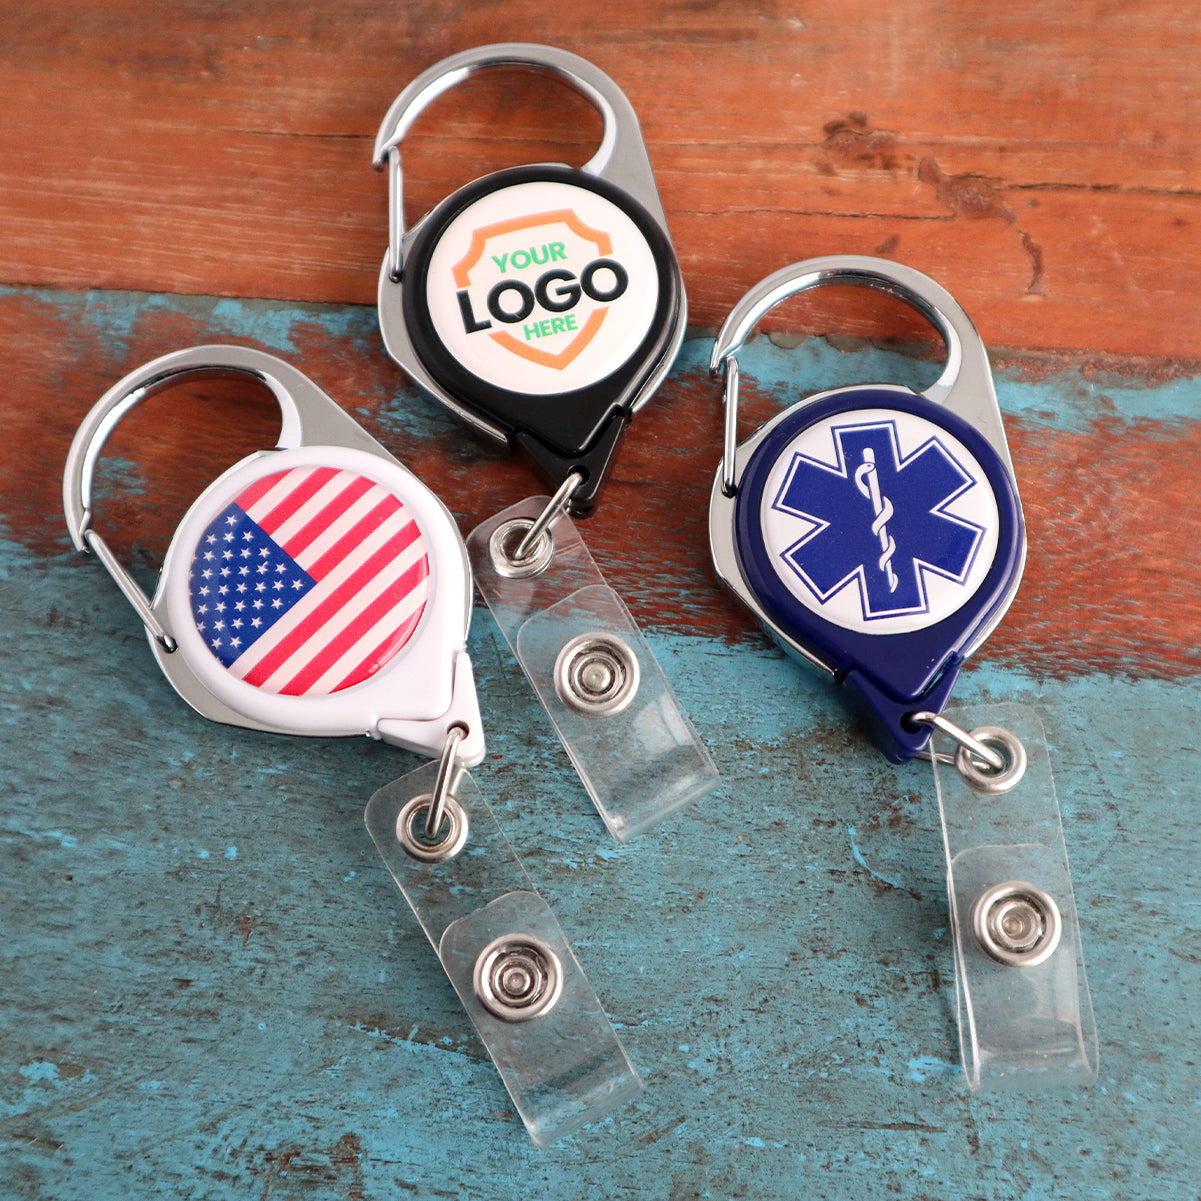 Custom Printed No Twist Carabiner Badge Reel with example flag, medical and add your logo here designed logos